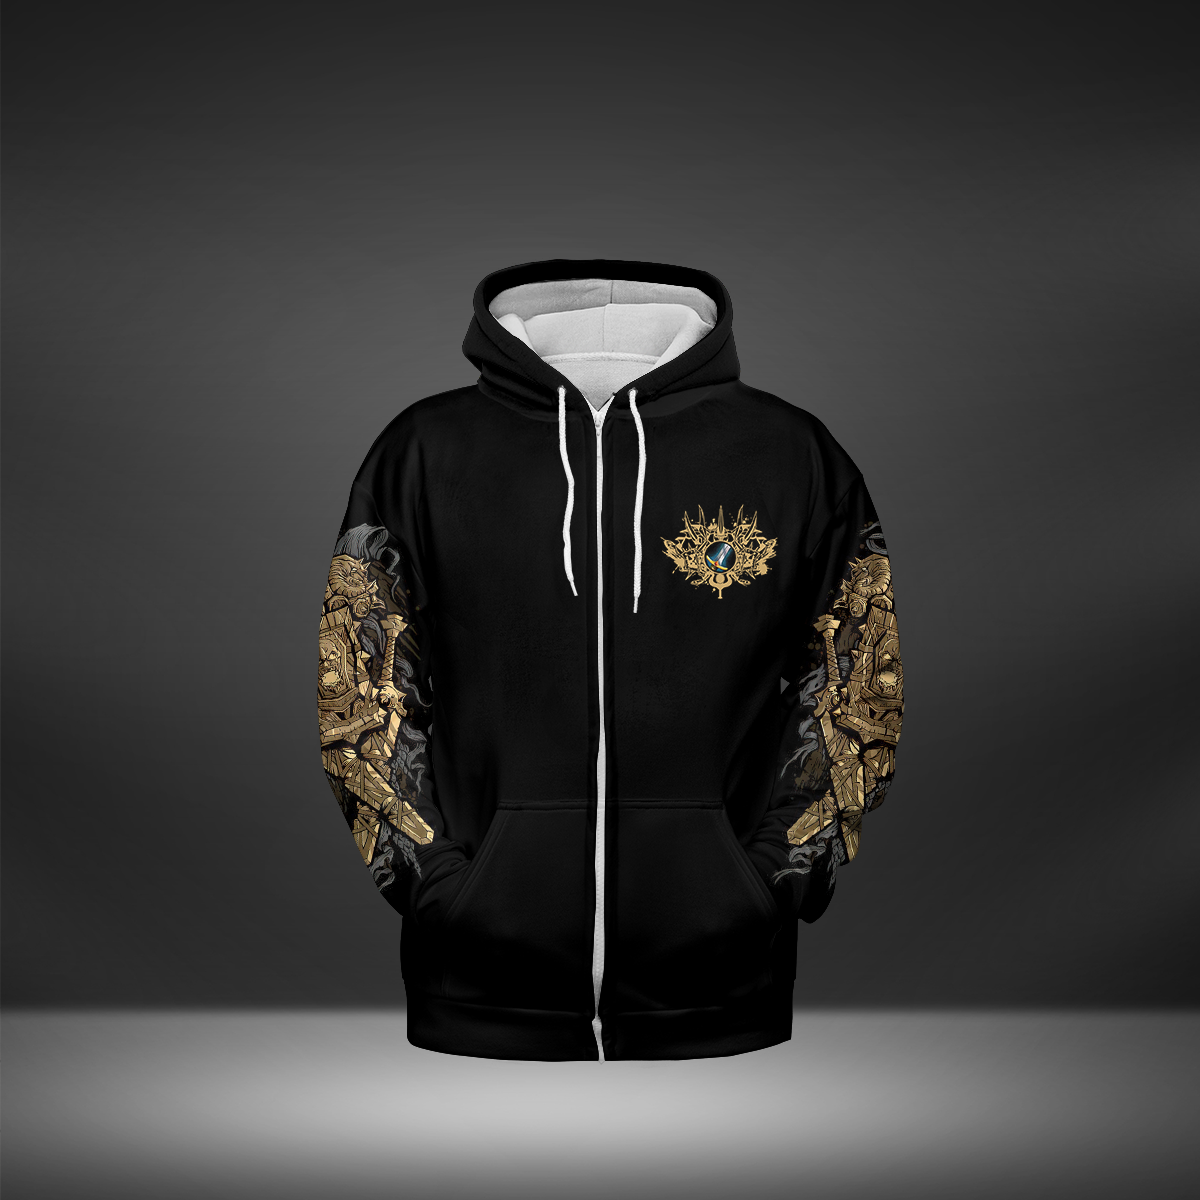 Warrior Class Quote All-over Print Zip Hoodie ( Midweight )